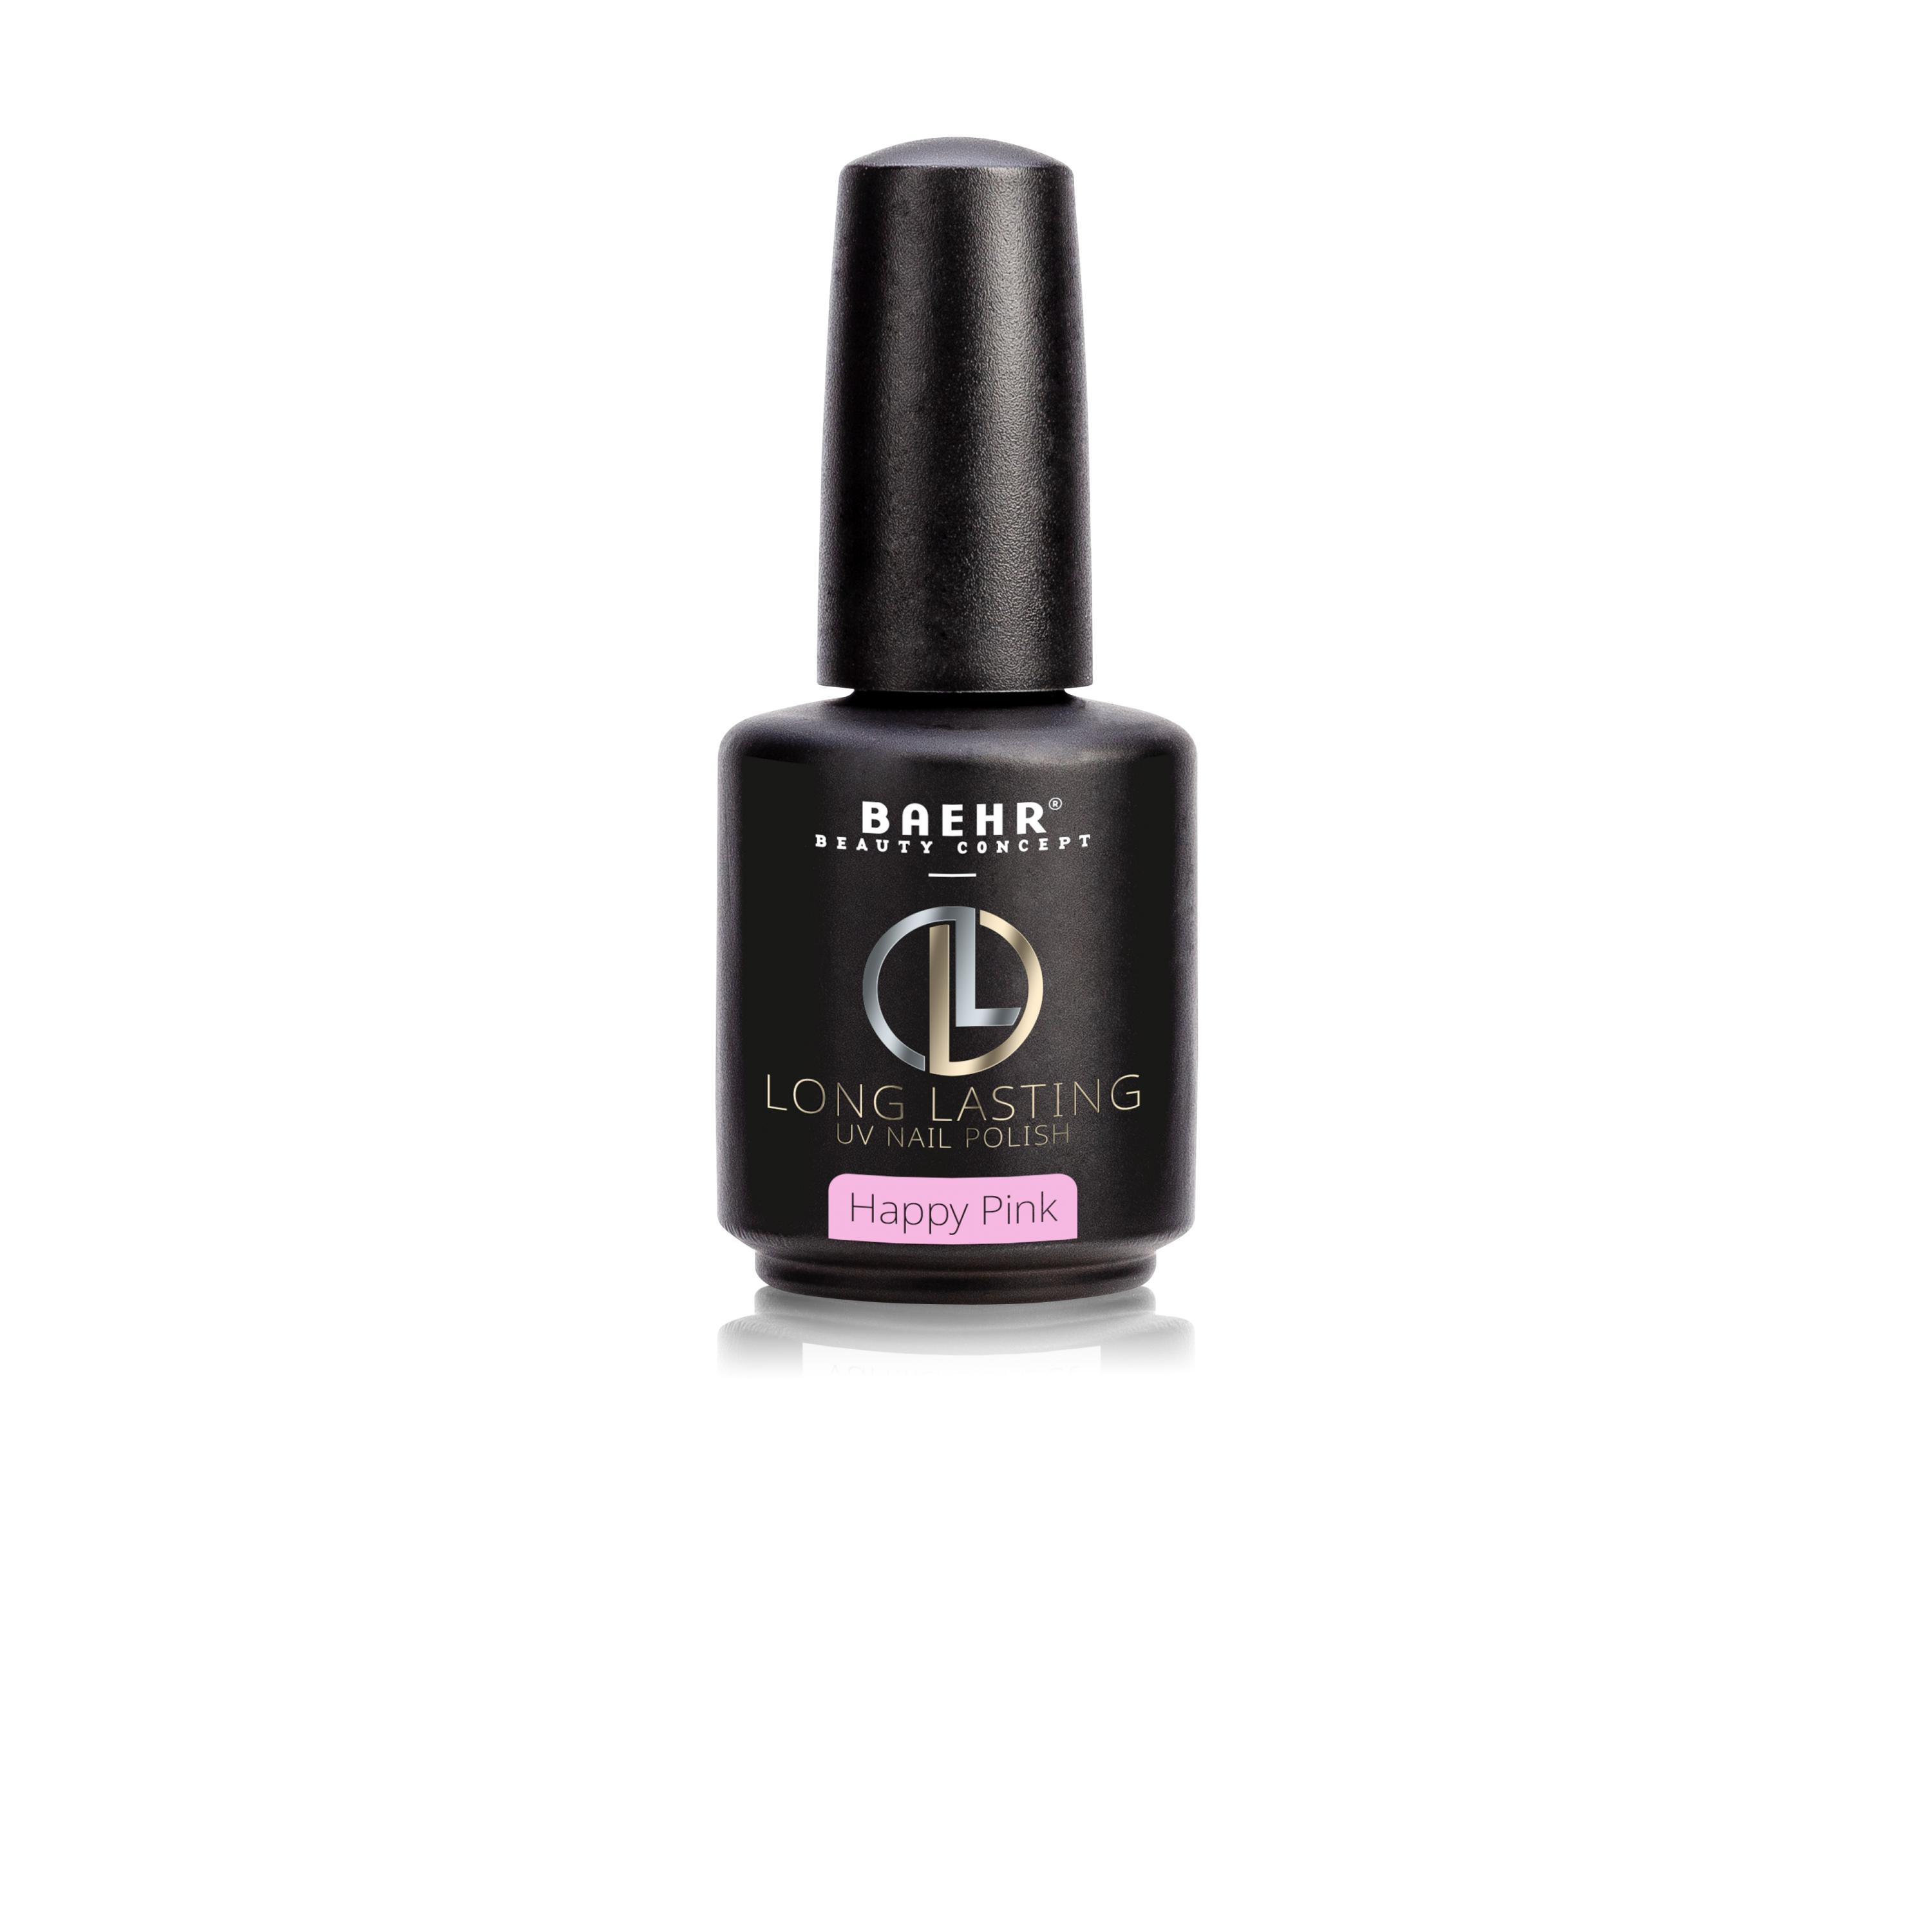 BAEHR BEAUTY CONCEPT - NAILS Long-Lasting Happy Pink 12 ml